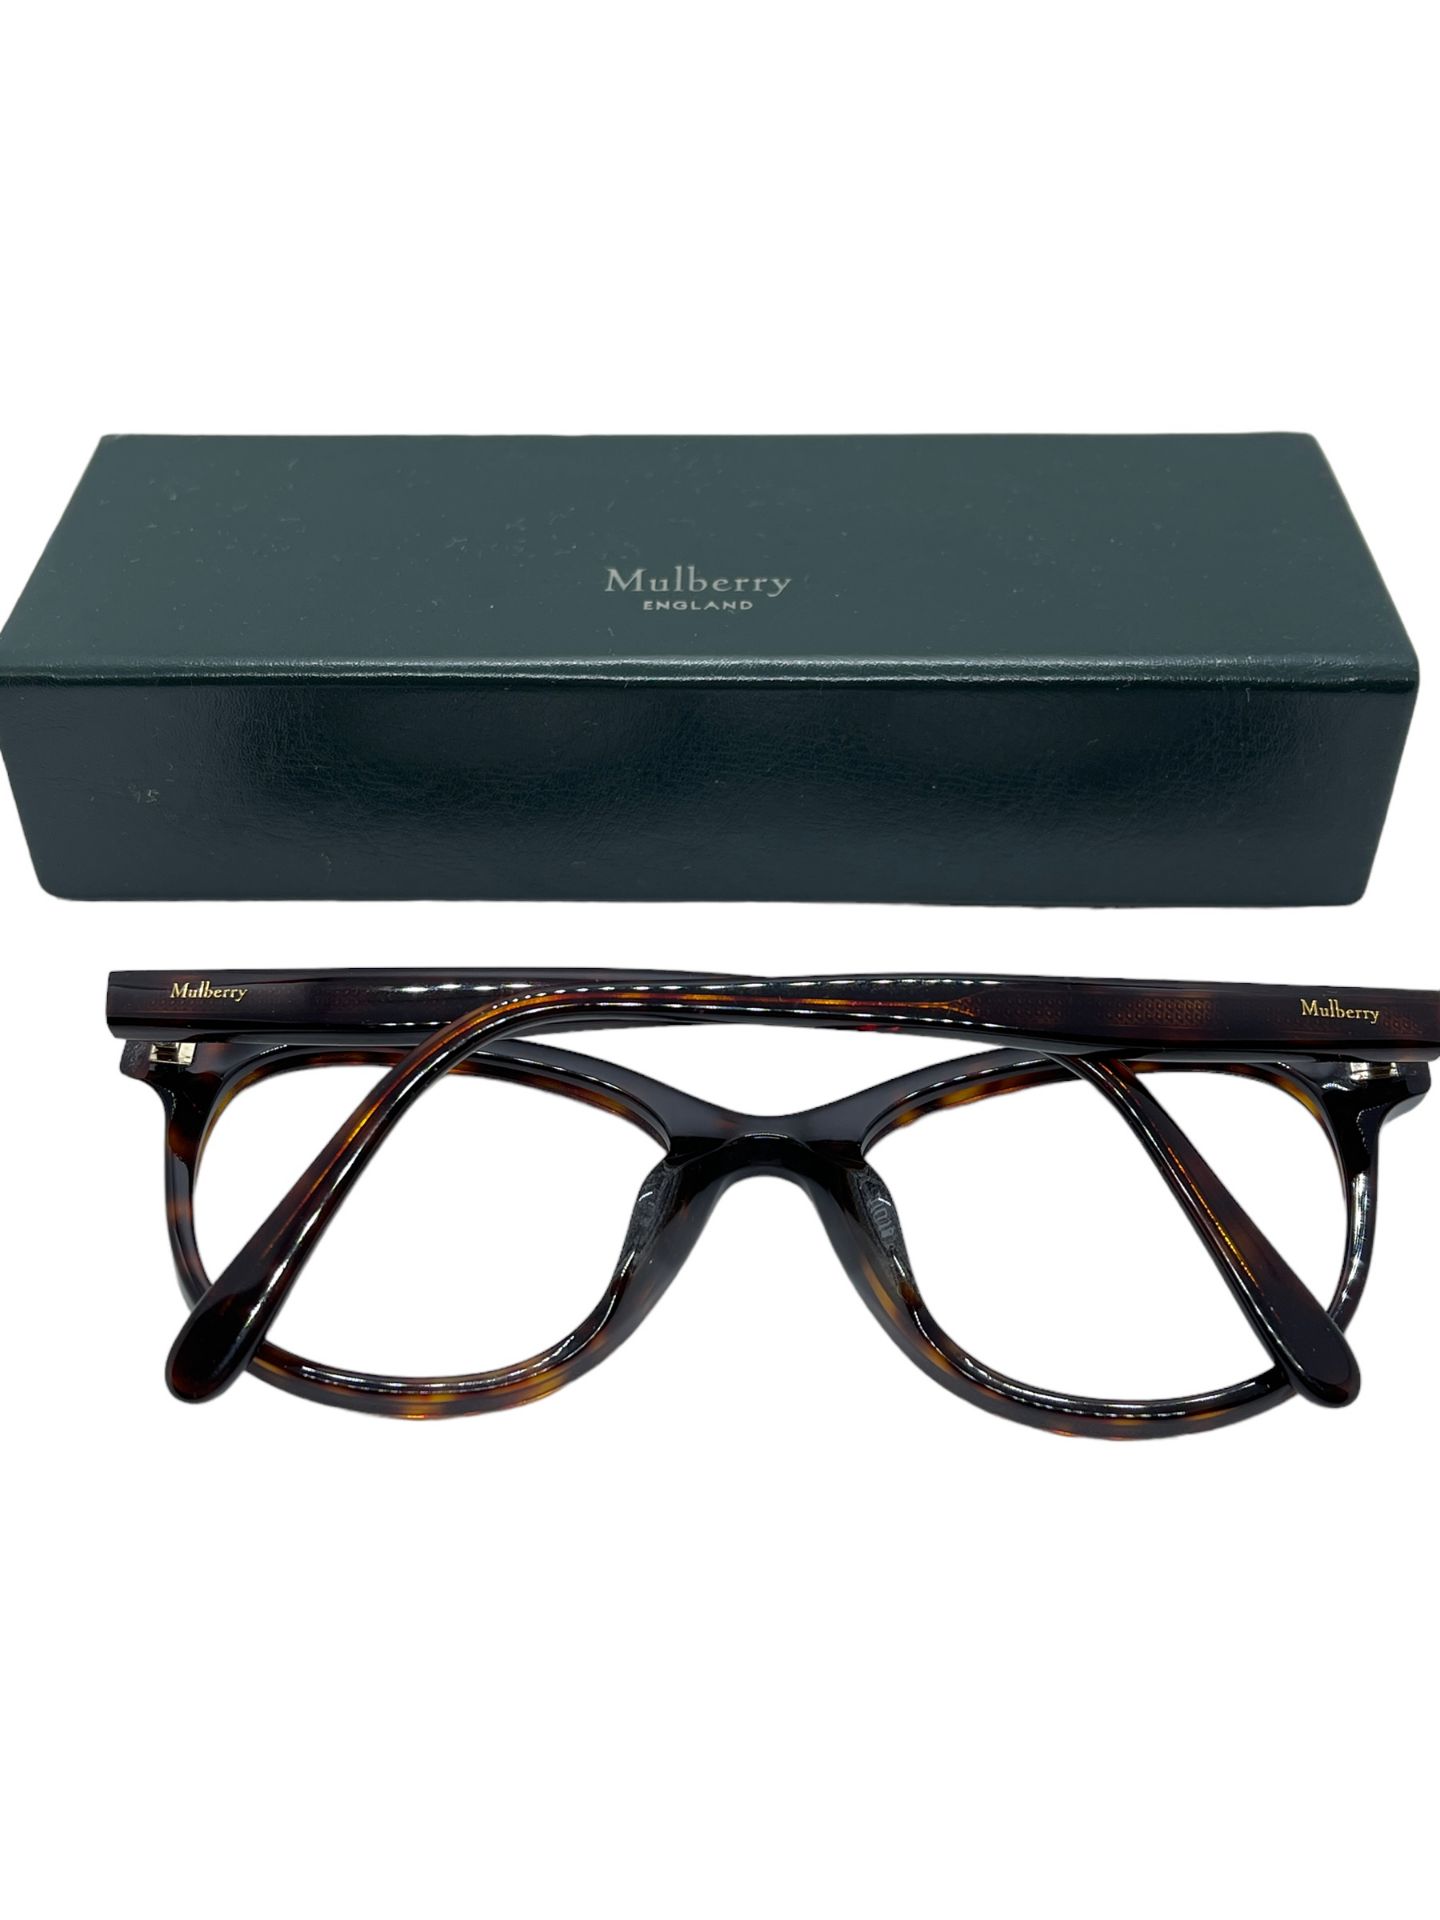 Mulberry unisex frames xdemo - Image 4 of 4